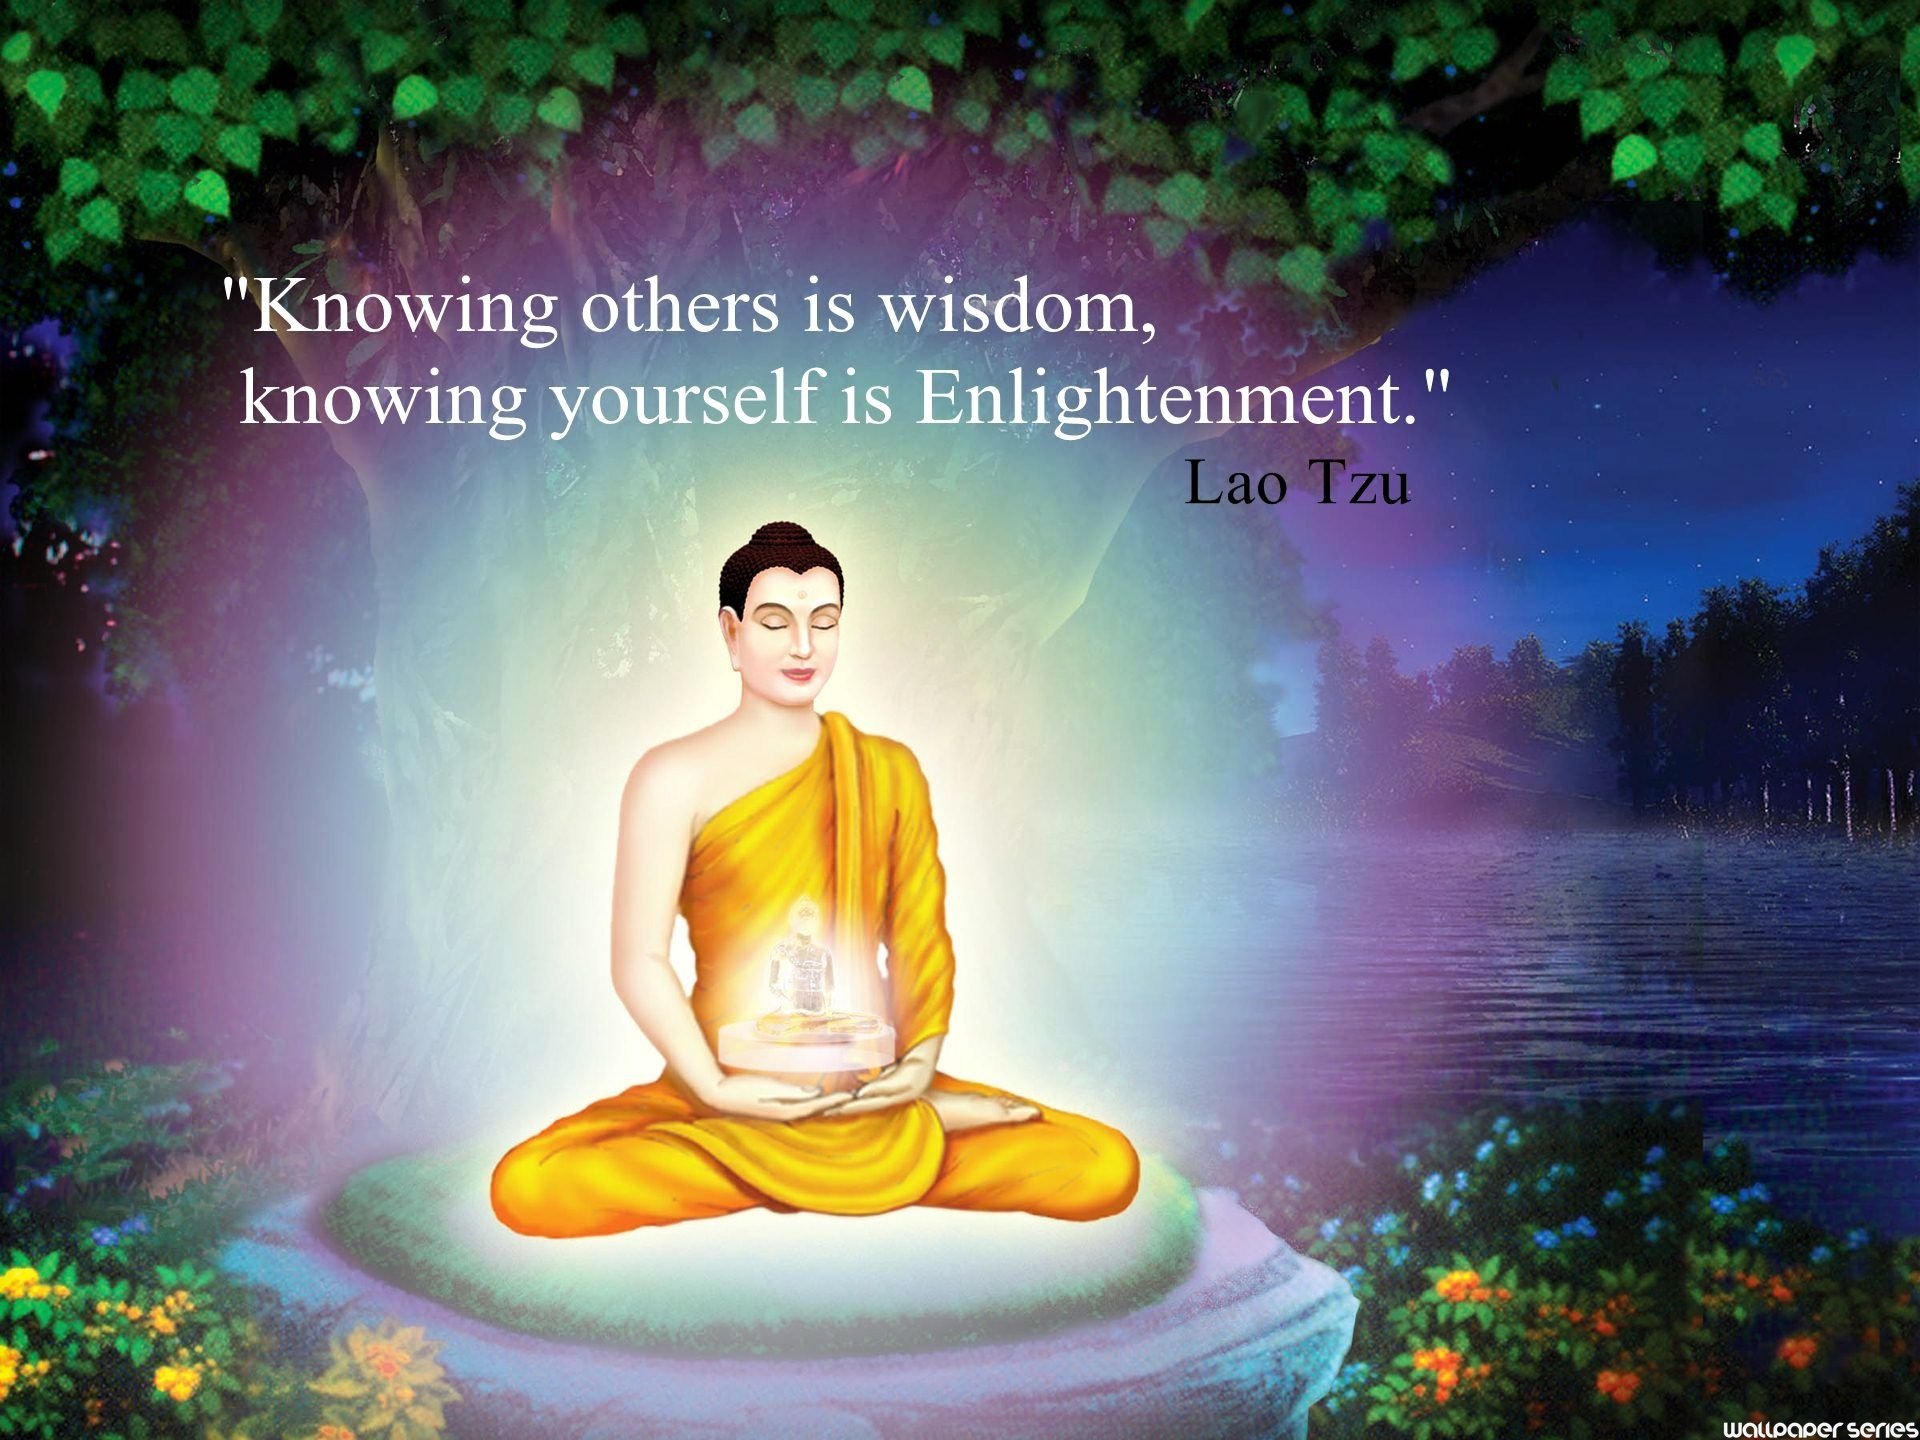 Enlightenment Quotes And Sayings. QuotesGram